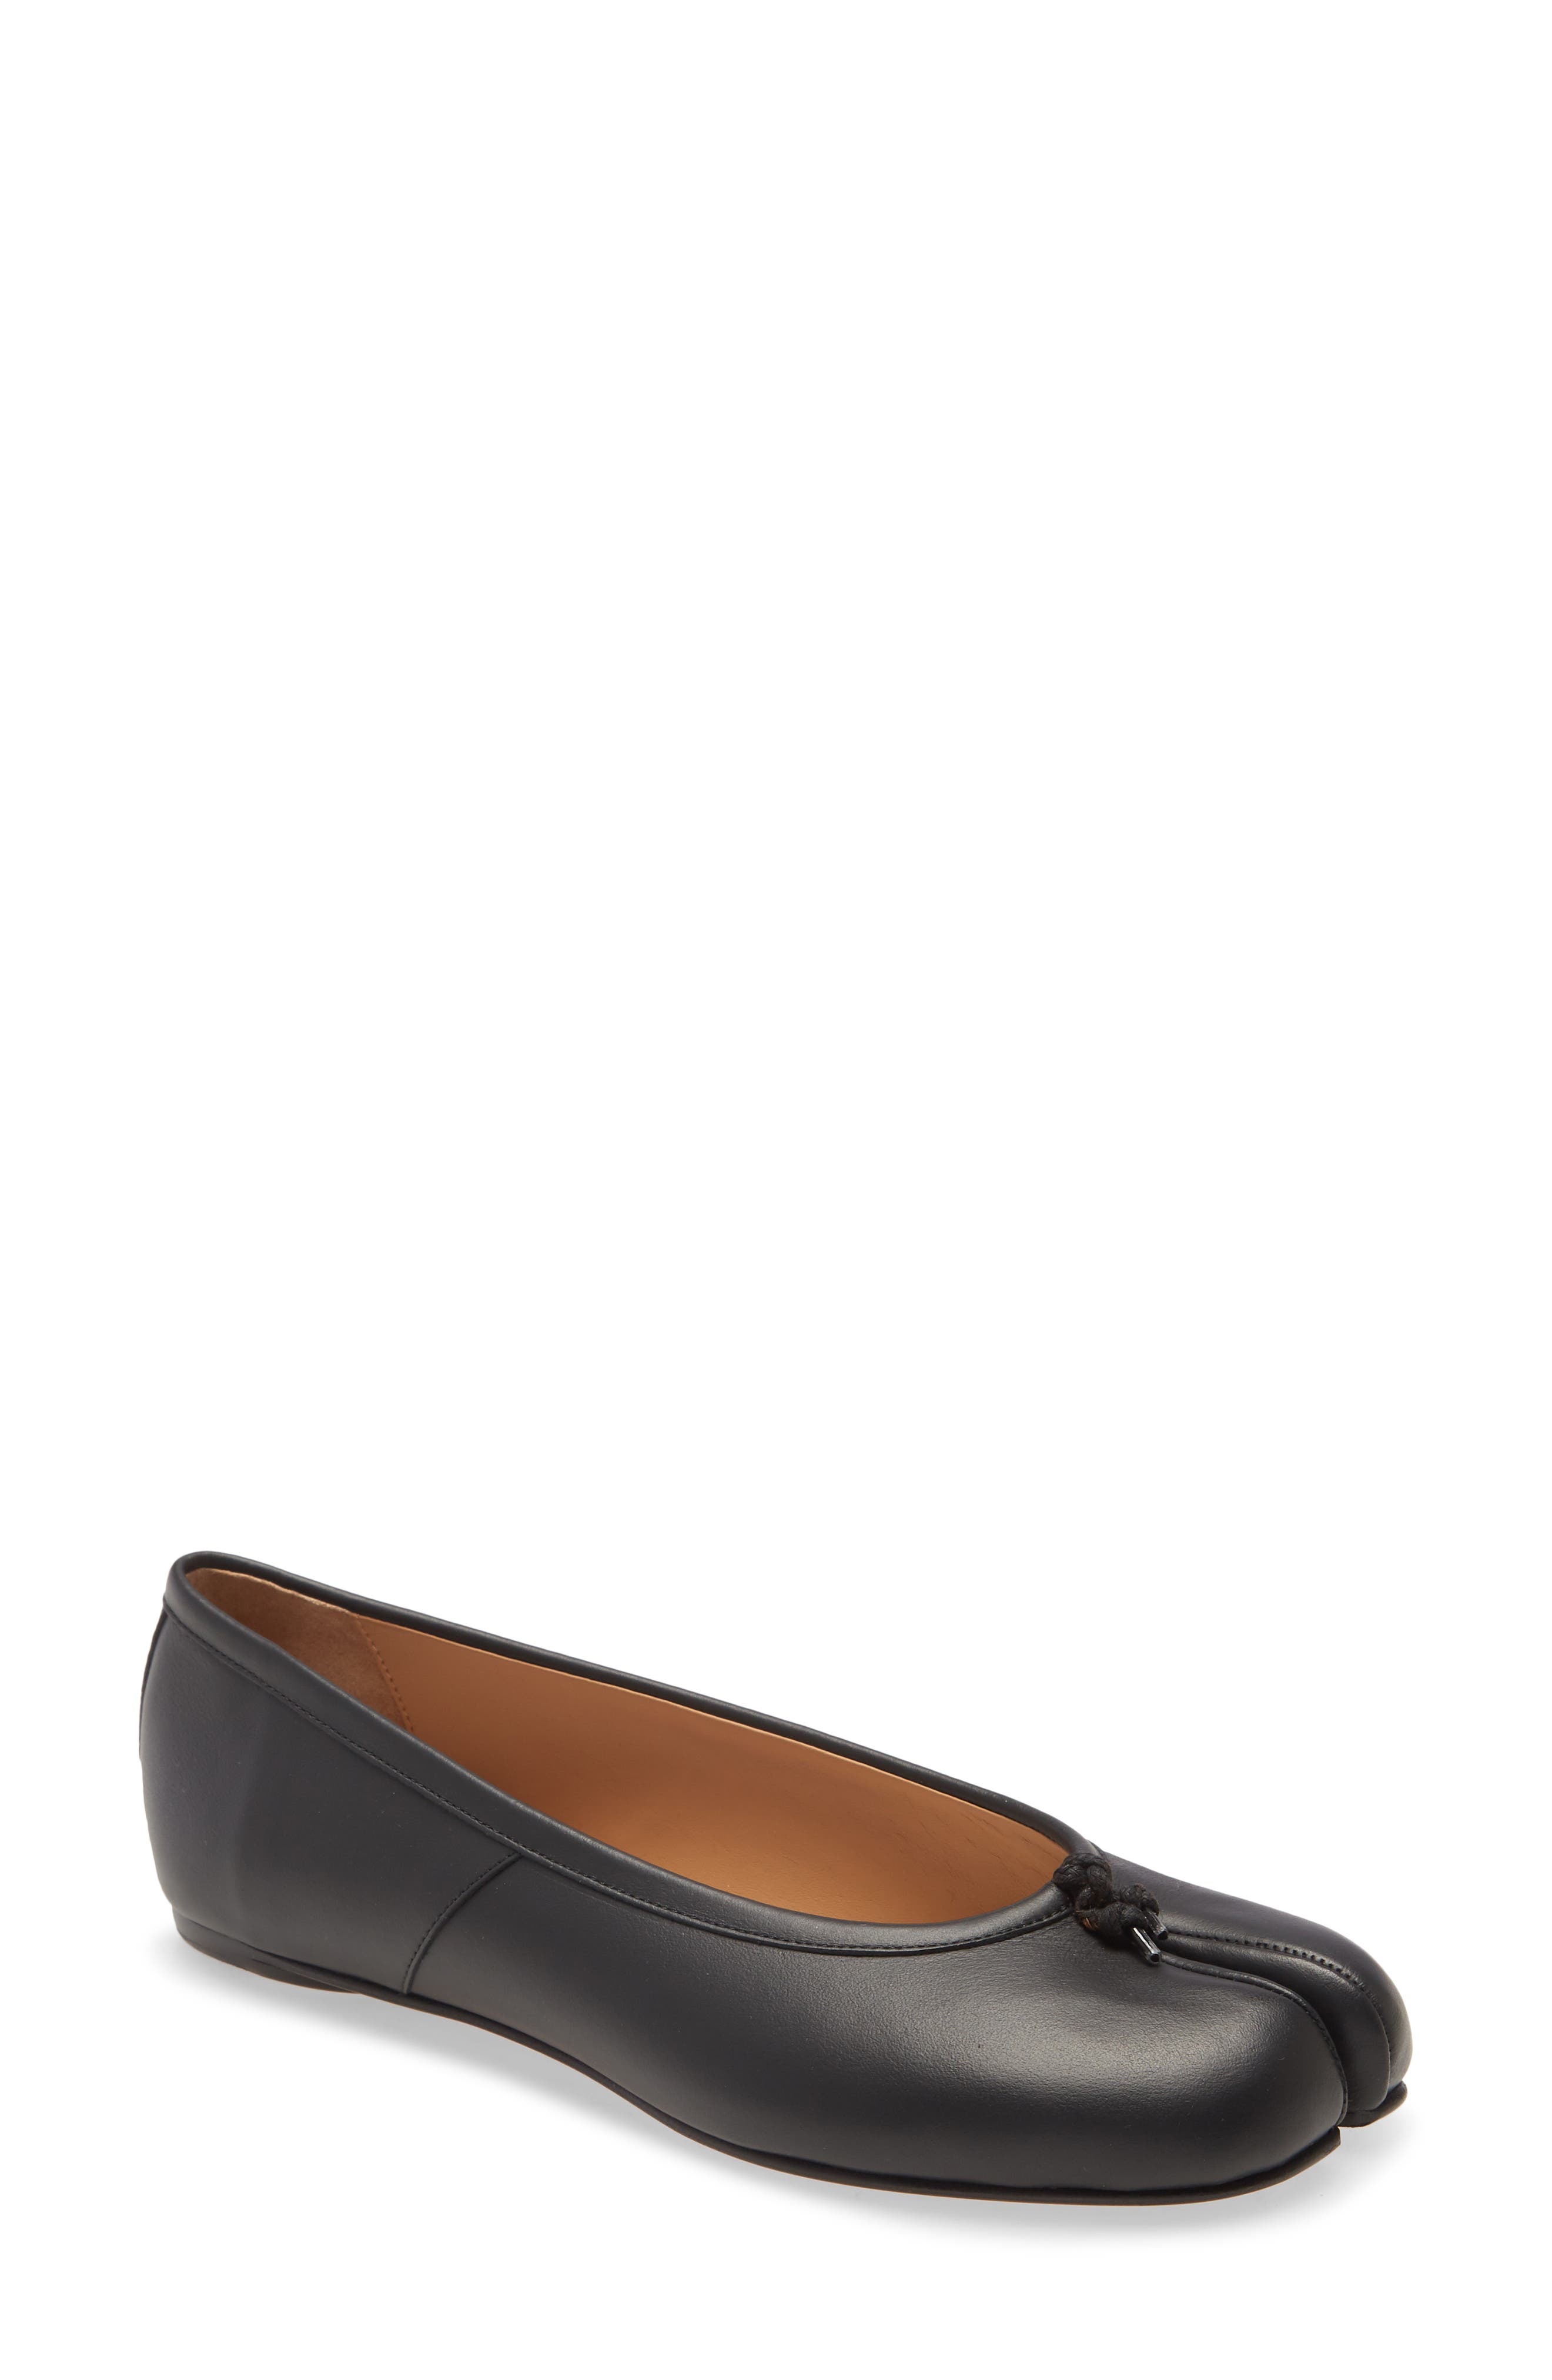 nordstrom flat shoes